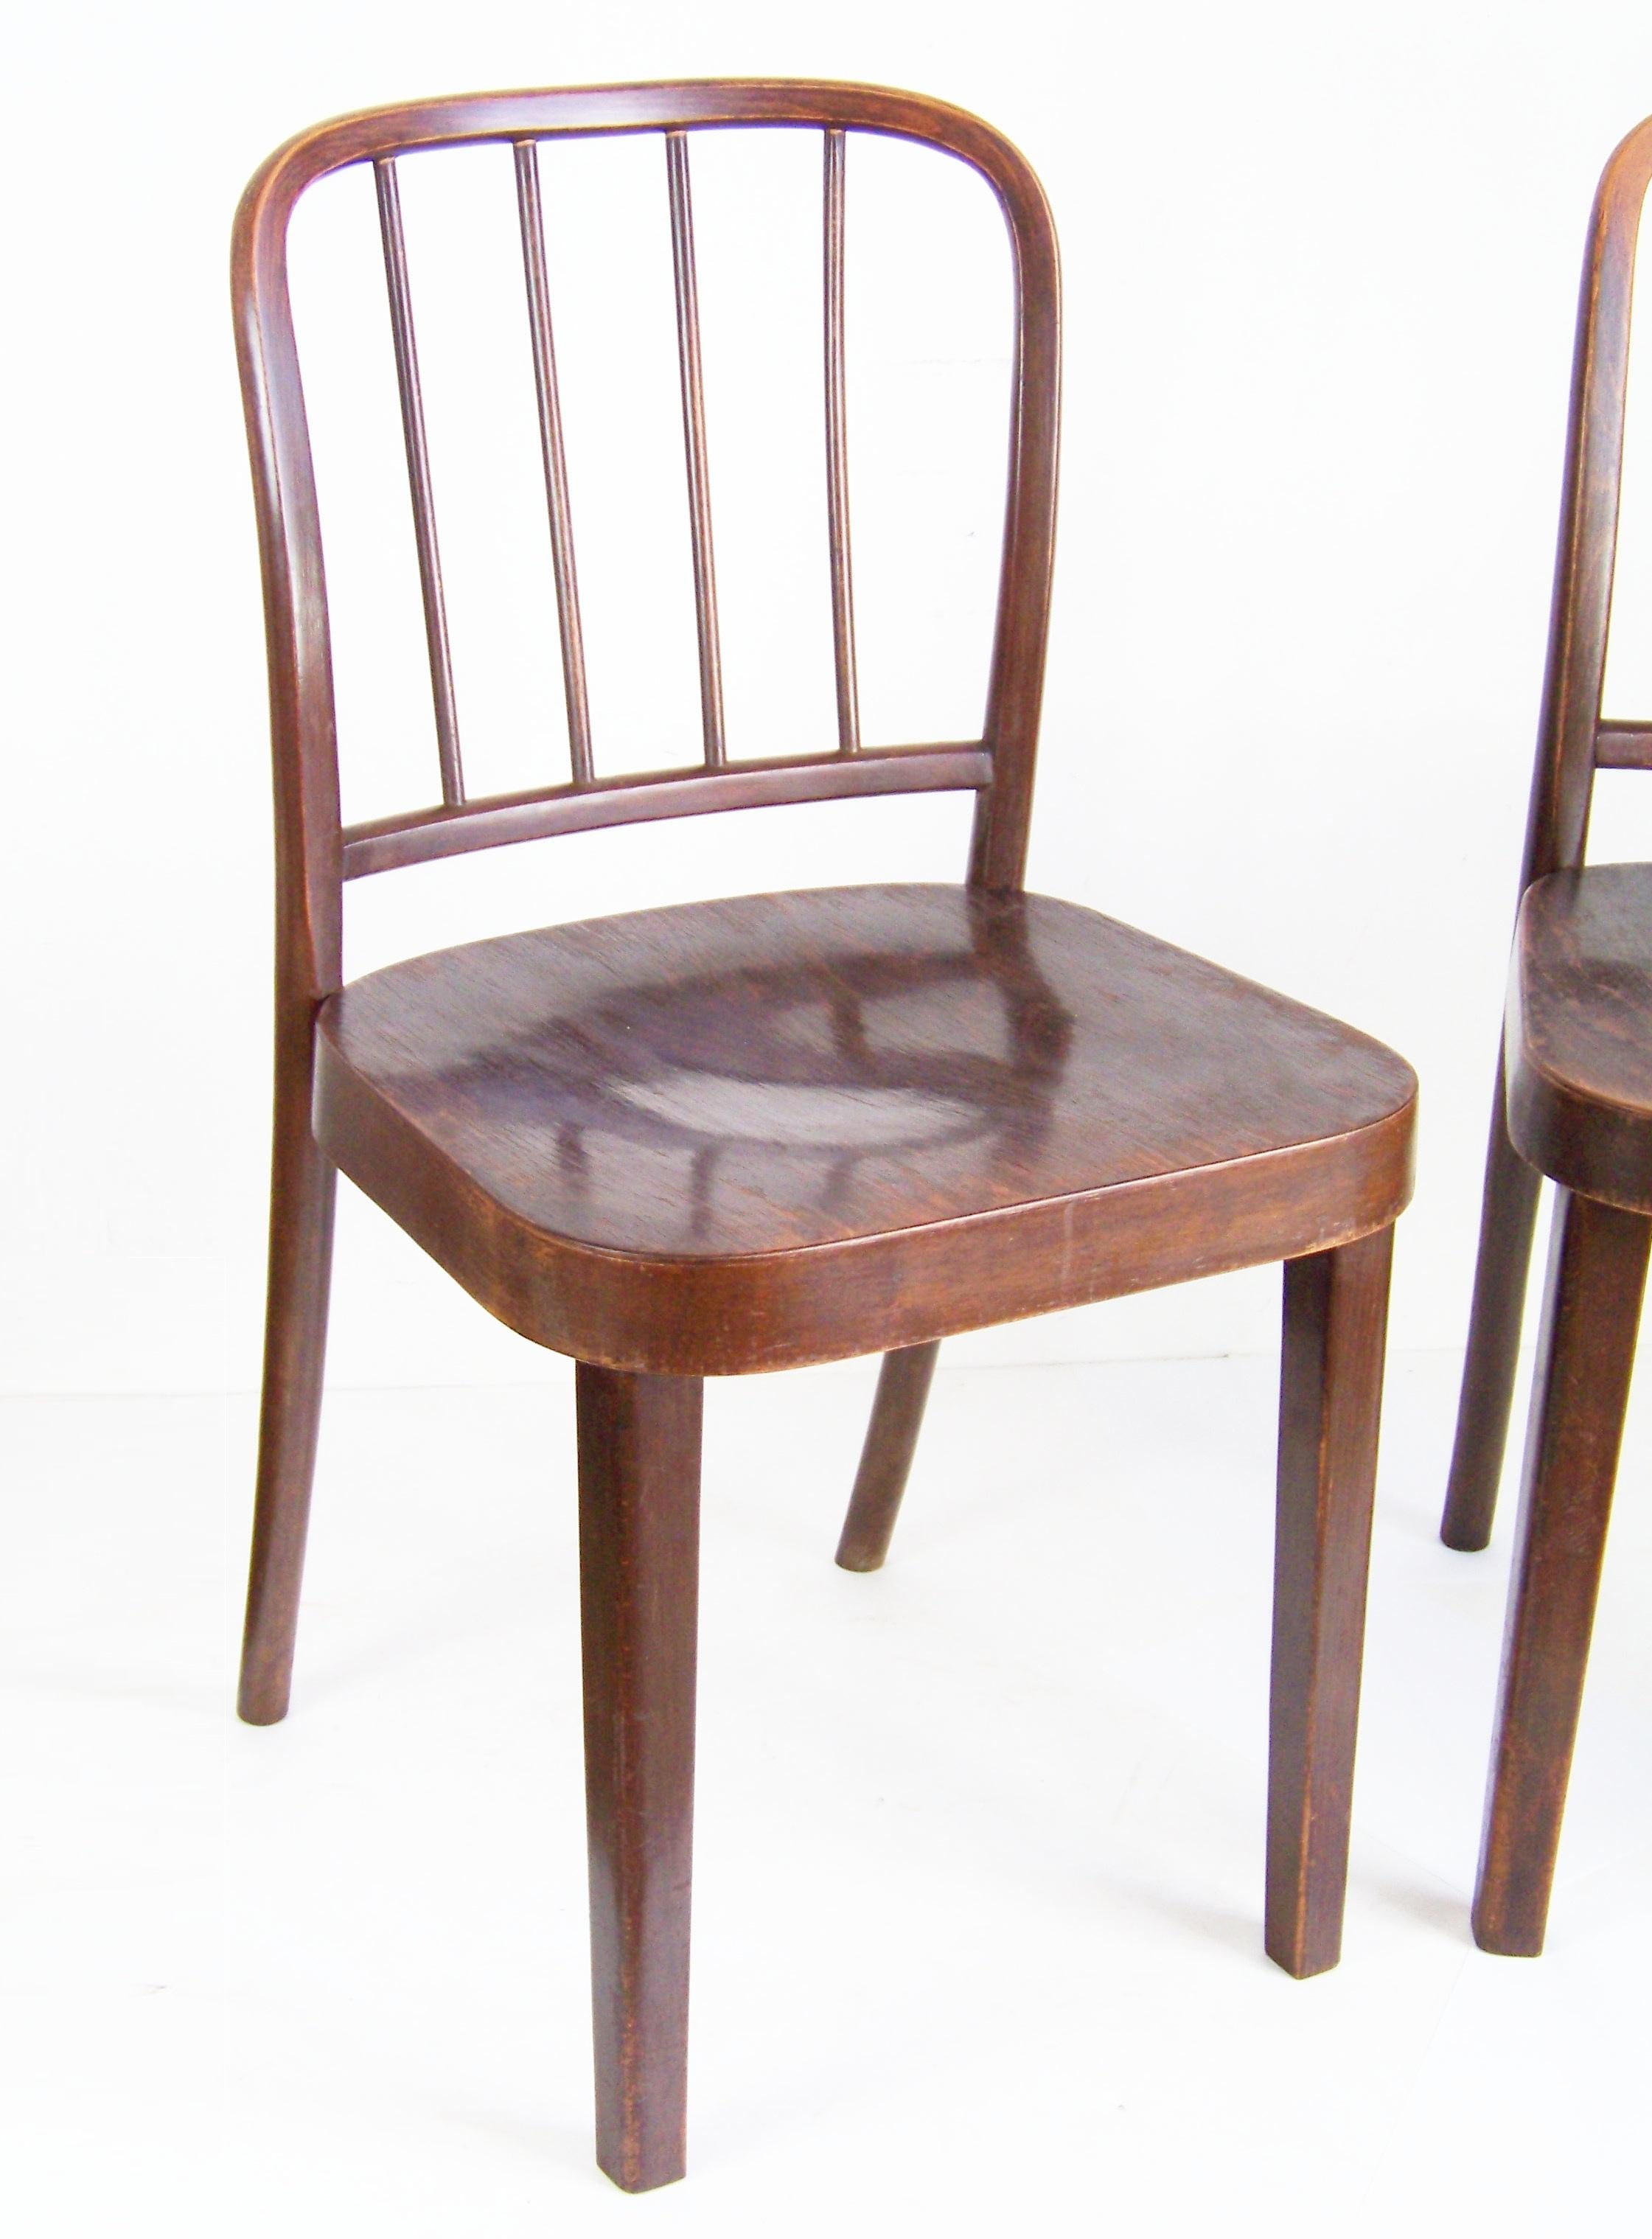 Chair A811 designed by Josef Hoffmann in 1930 for Thonet. It was the last known work of Josef Hoffman in the bentwood furniture industry. Original state with patina for many years of use. Strong and compact.